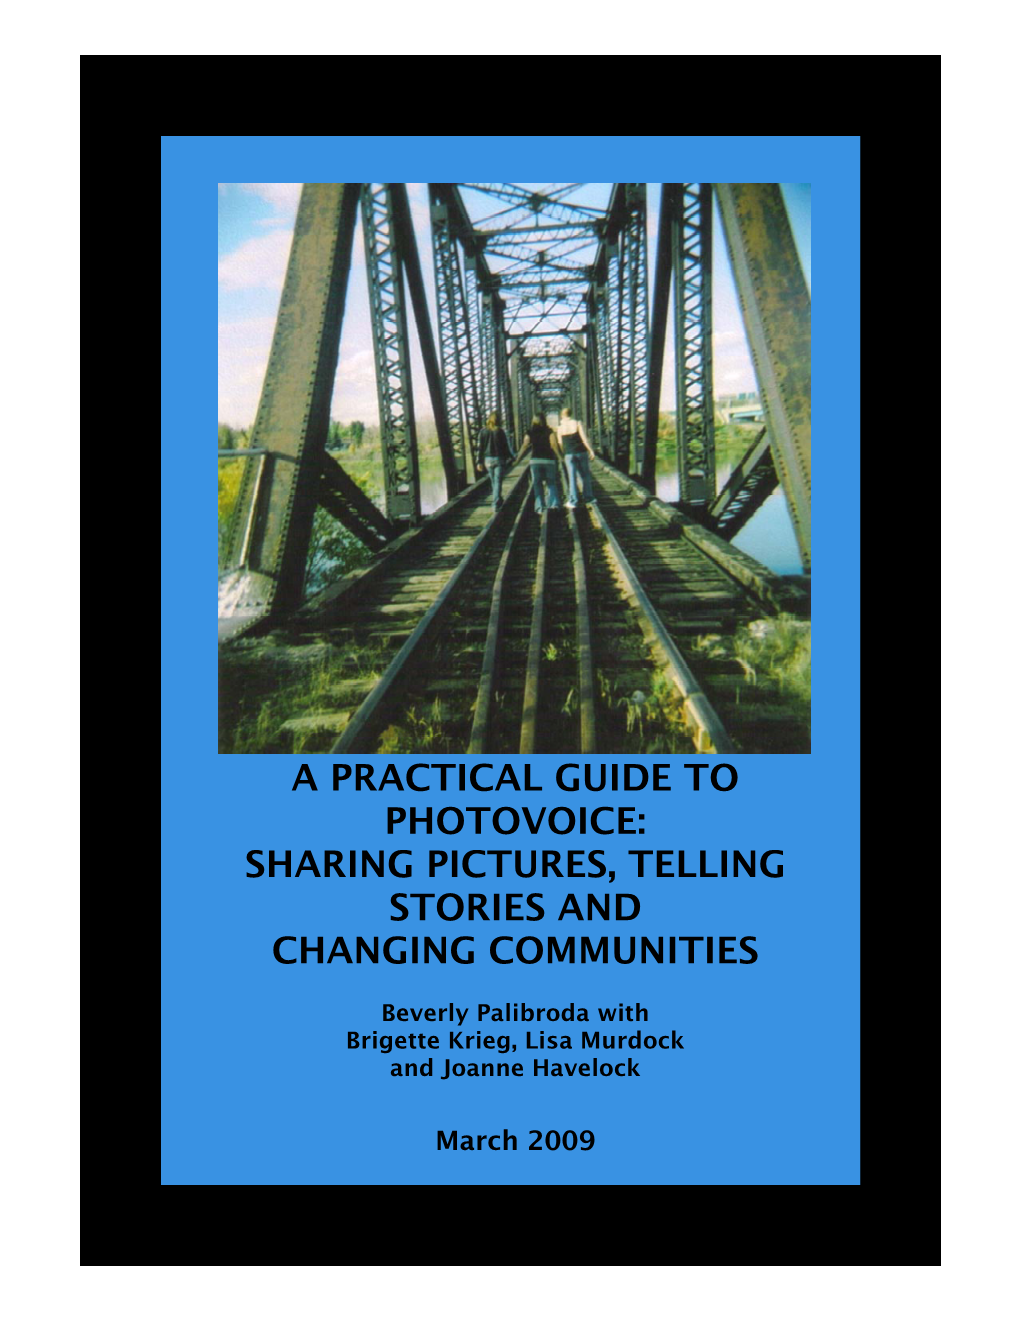 A Practical Guide to Photovoice: Sharing Pictures, Telling Stories and Changing Communities